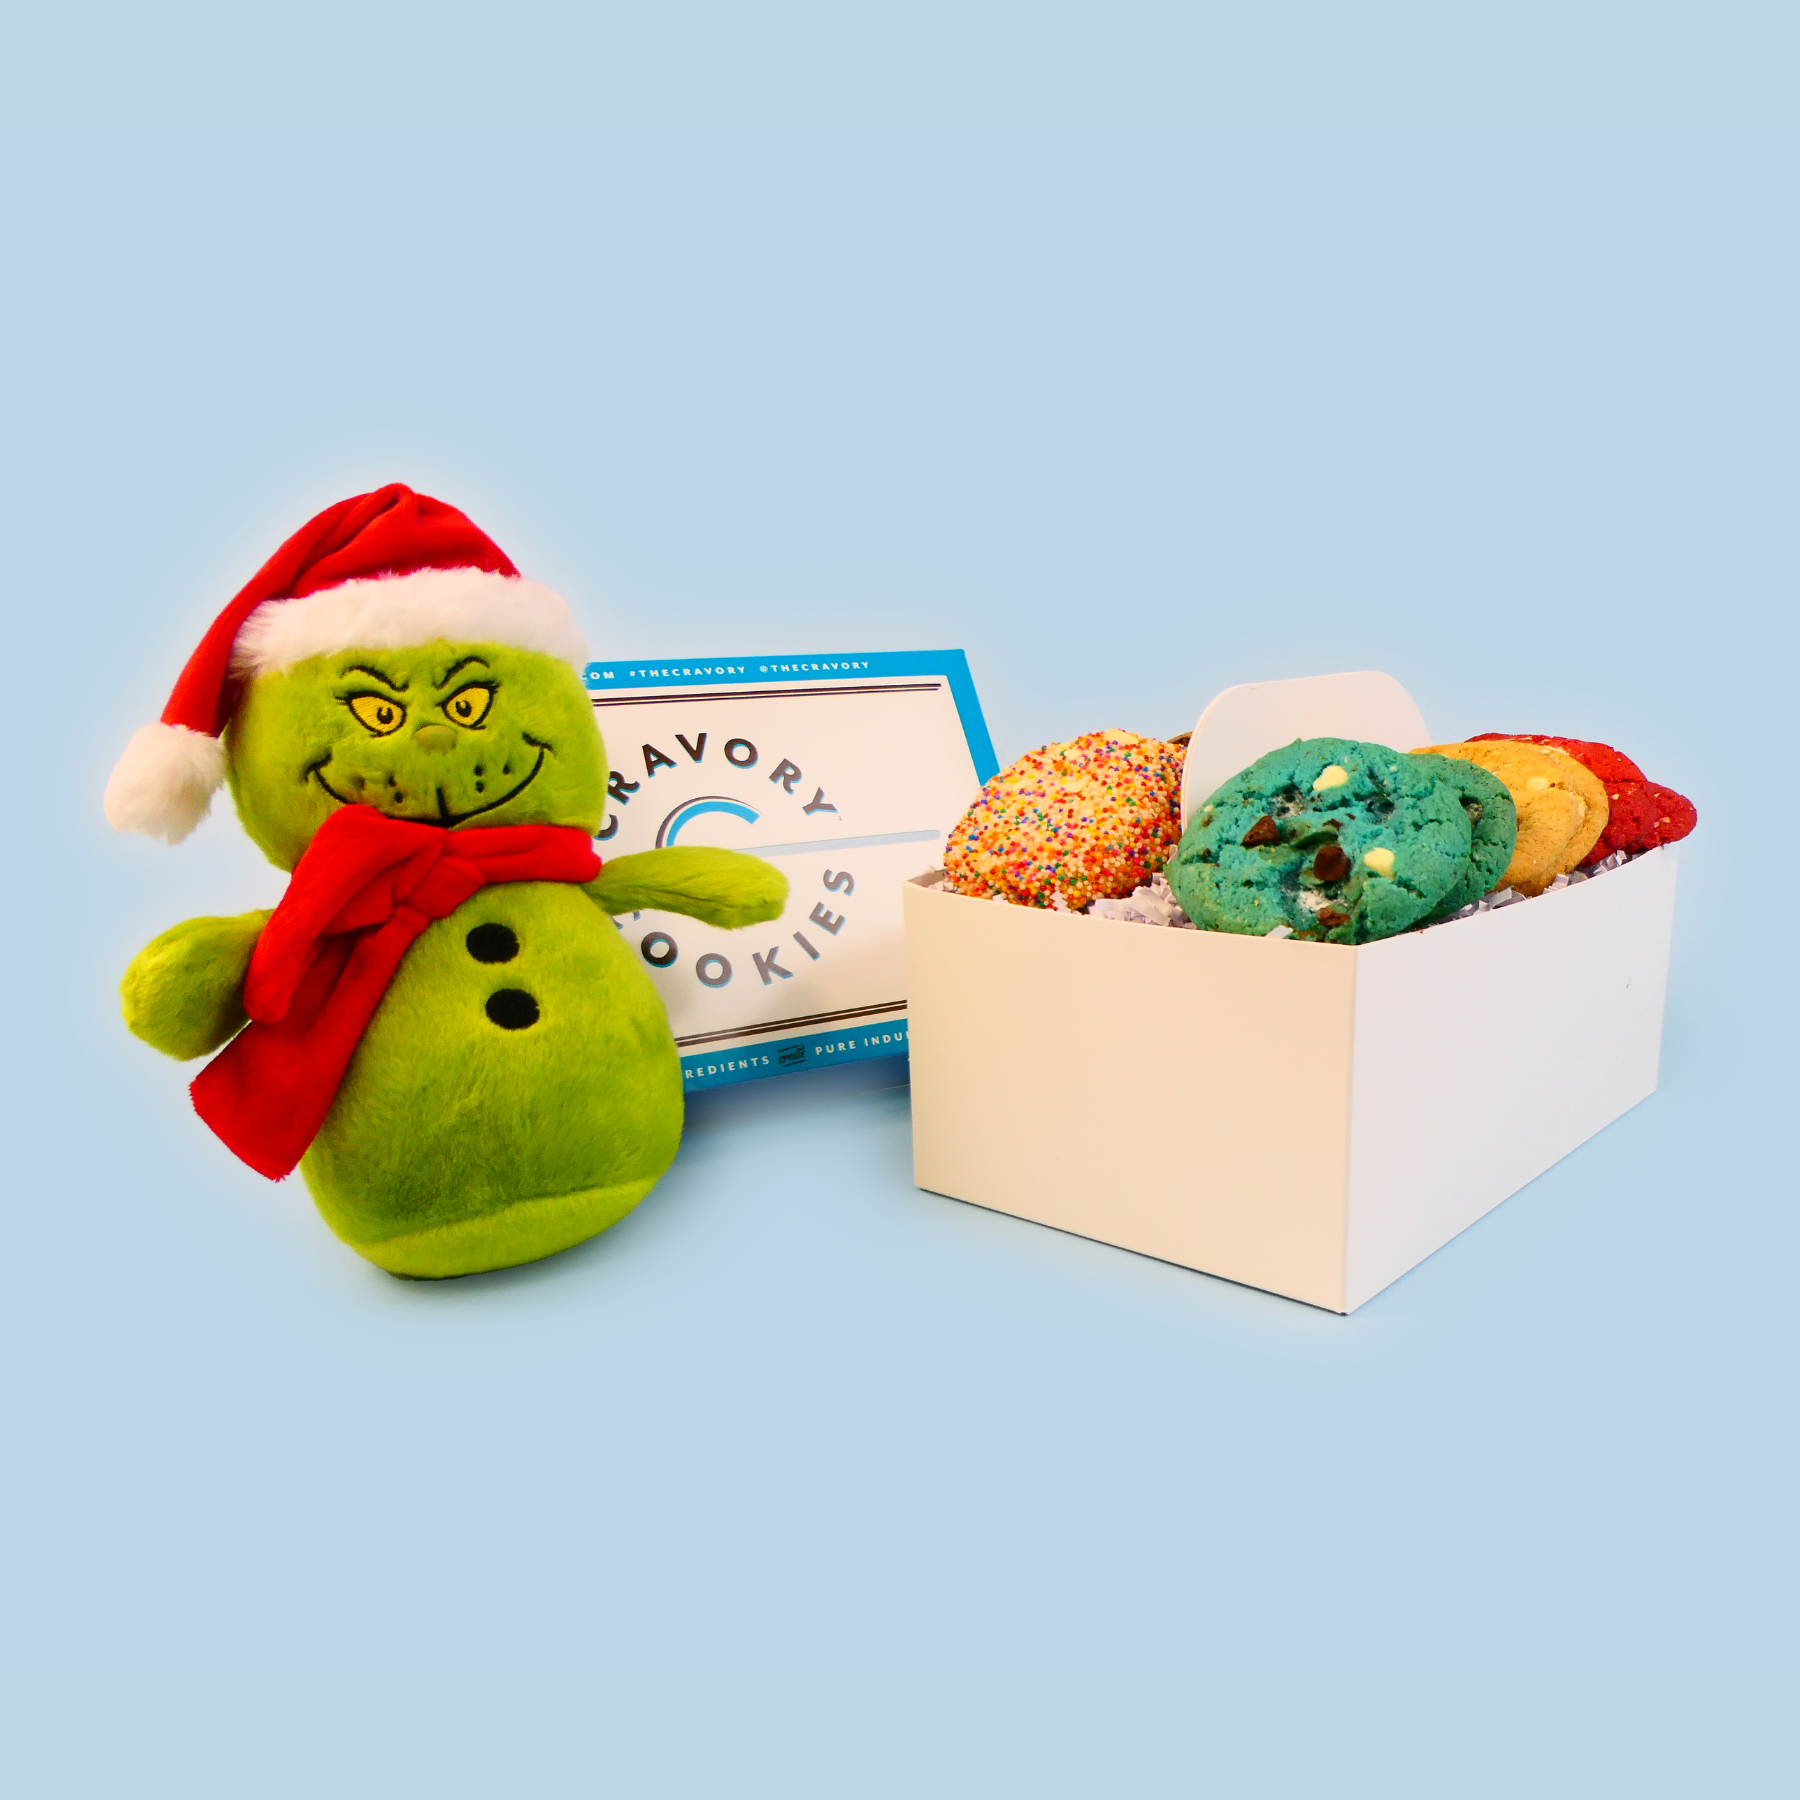 Kids Cookie Box - The Grinch